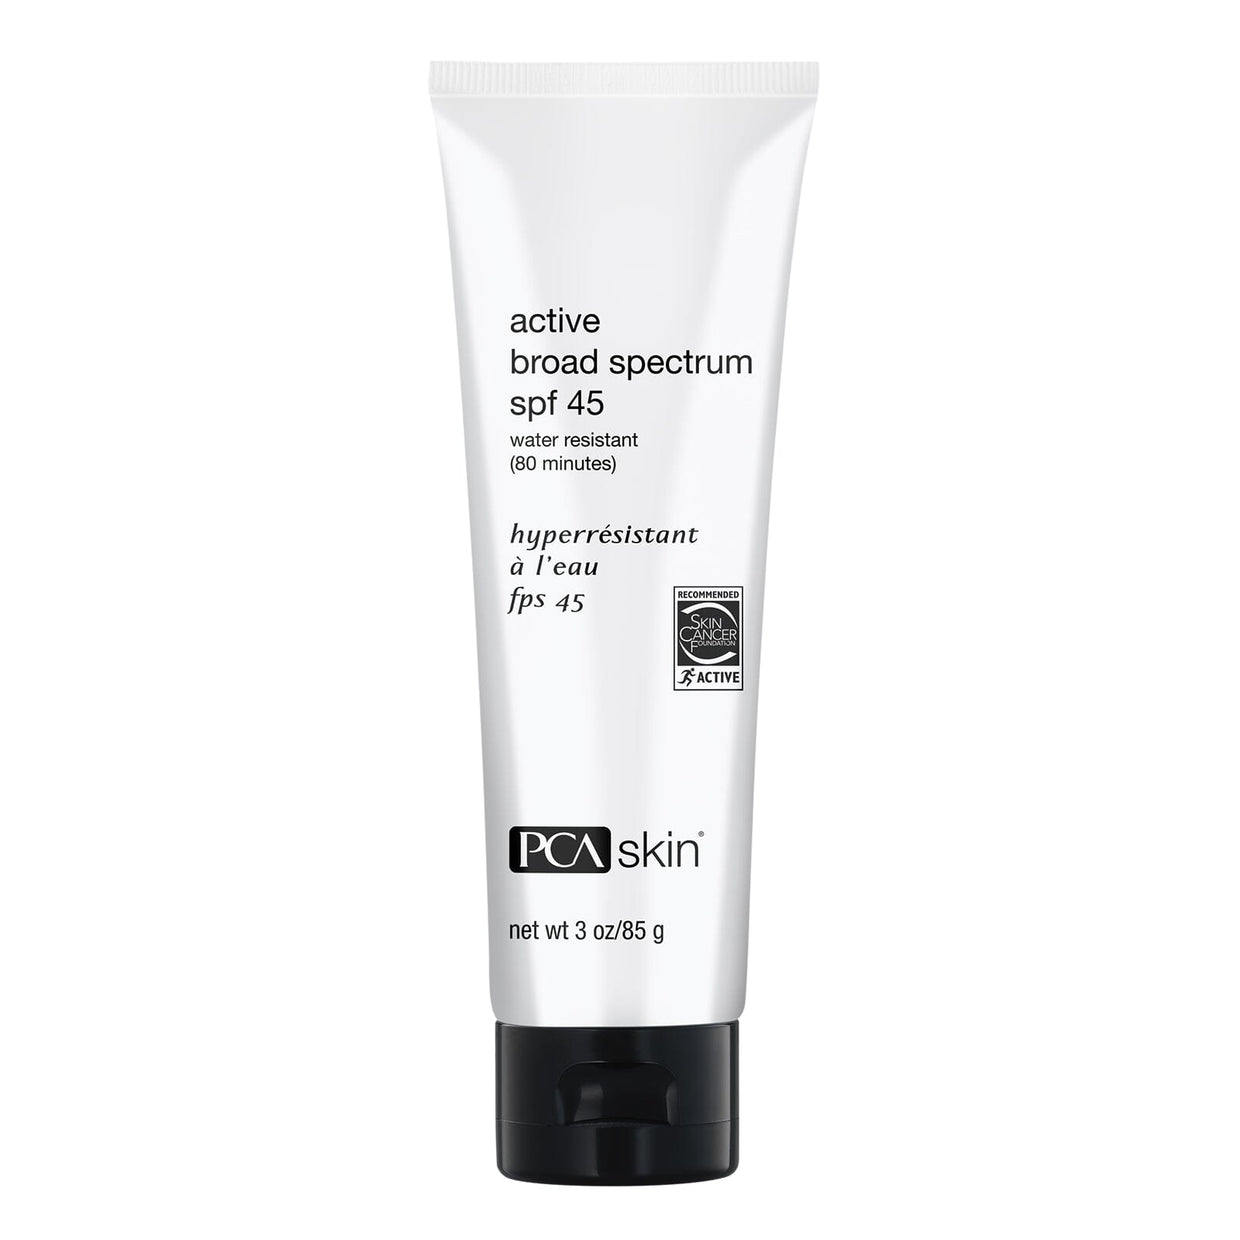 PCA Skin Active Broad Spectrum SPF 45 - Water Resistant PCA Skin 3 oz. Shop at Exclusive Beauty Club